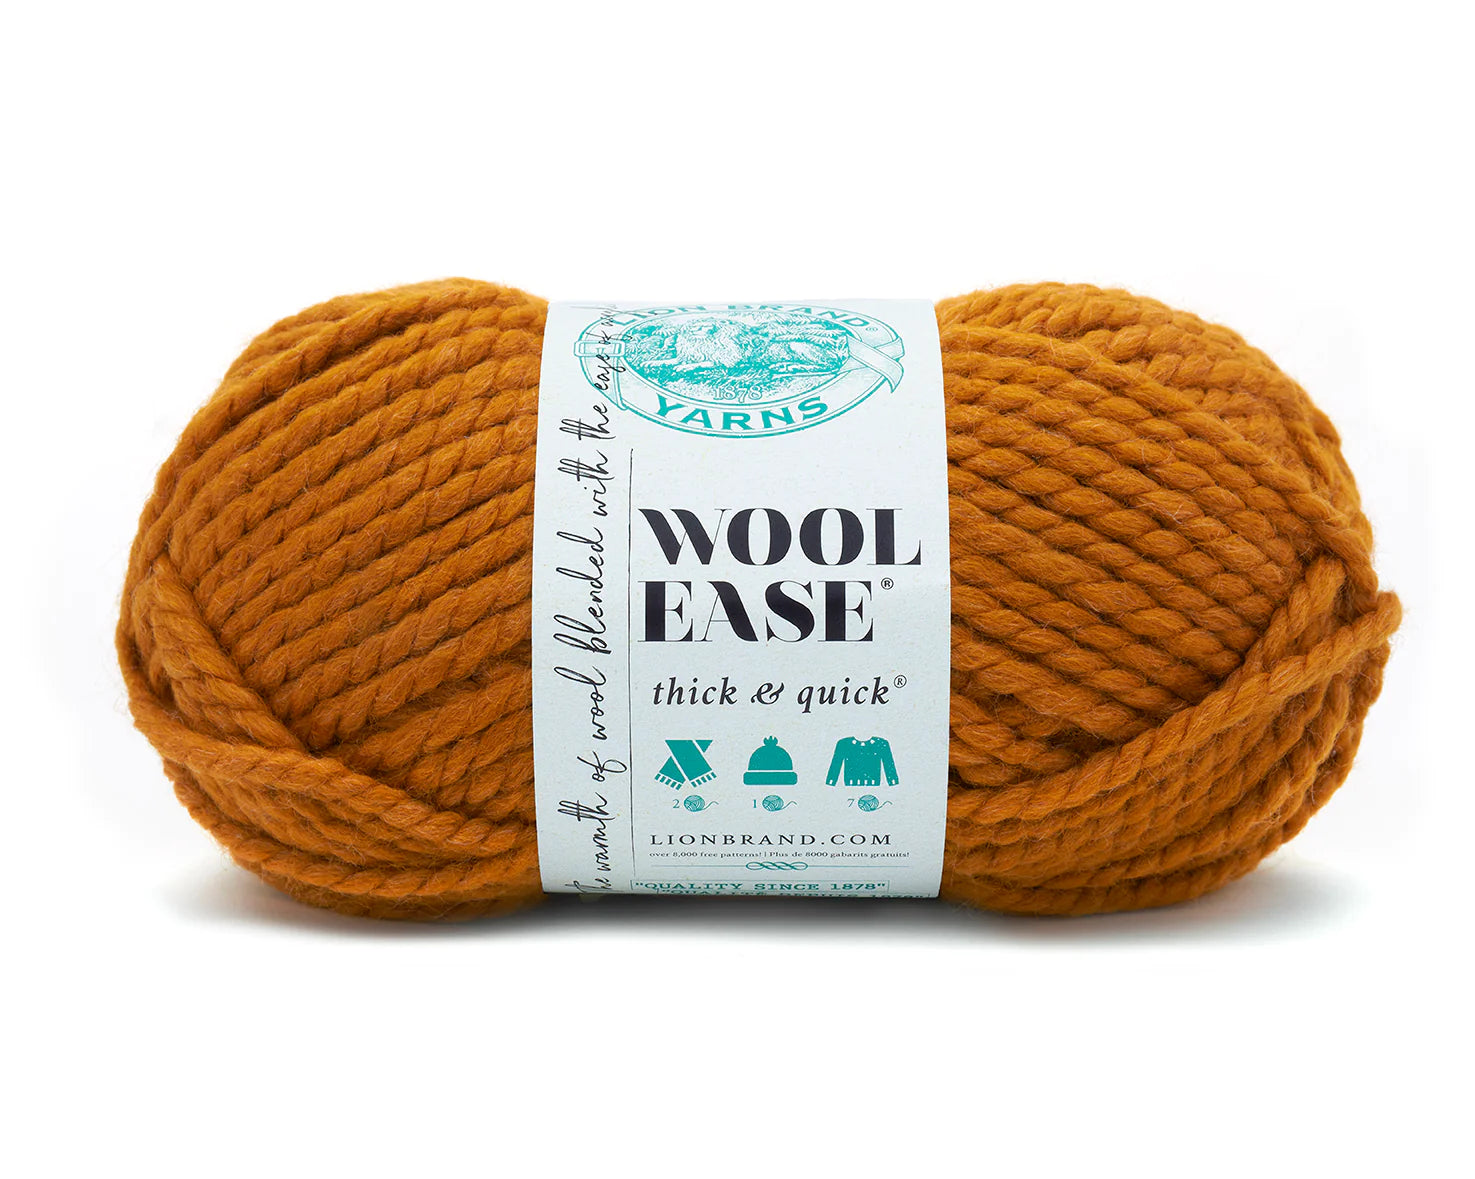 Lion Brand Yarn Woolease Thick & Quick Yarn, 1 Pack, Hydro